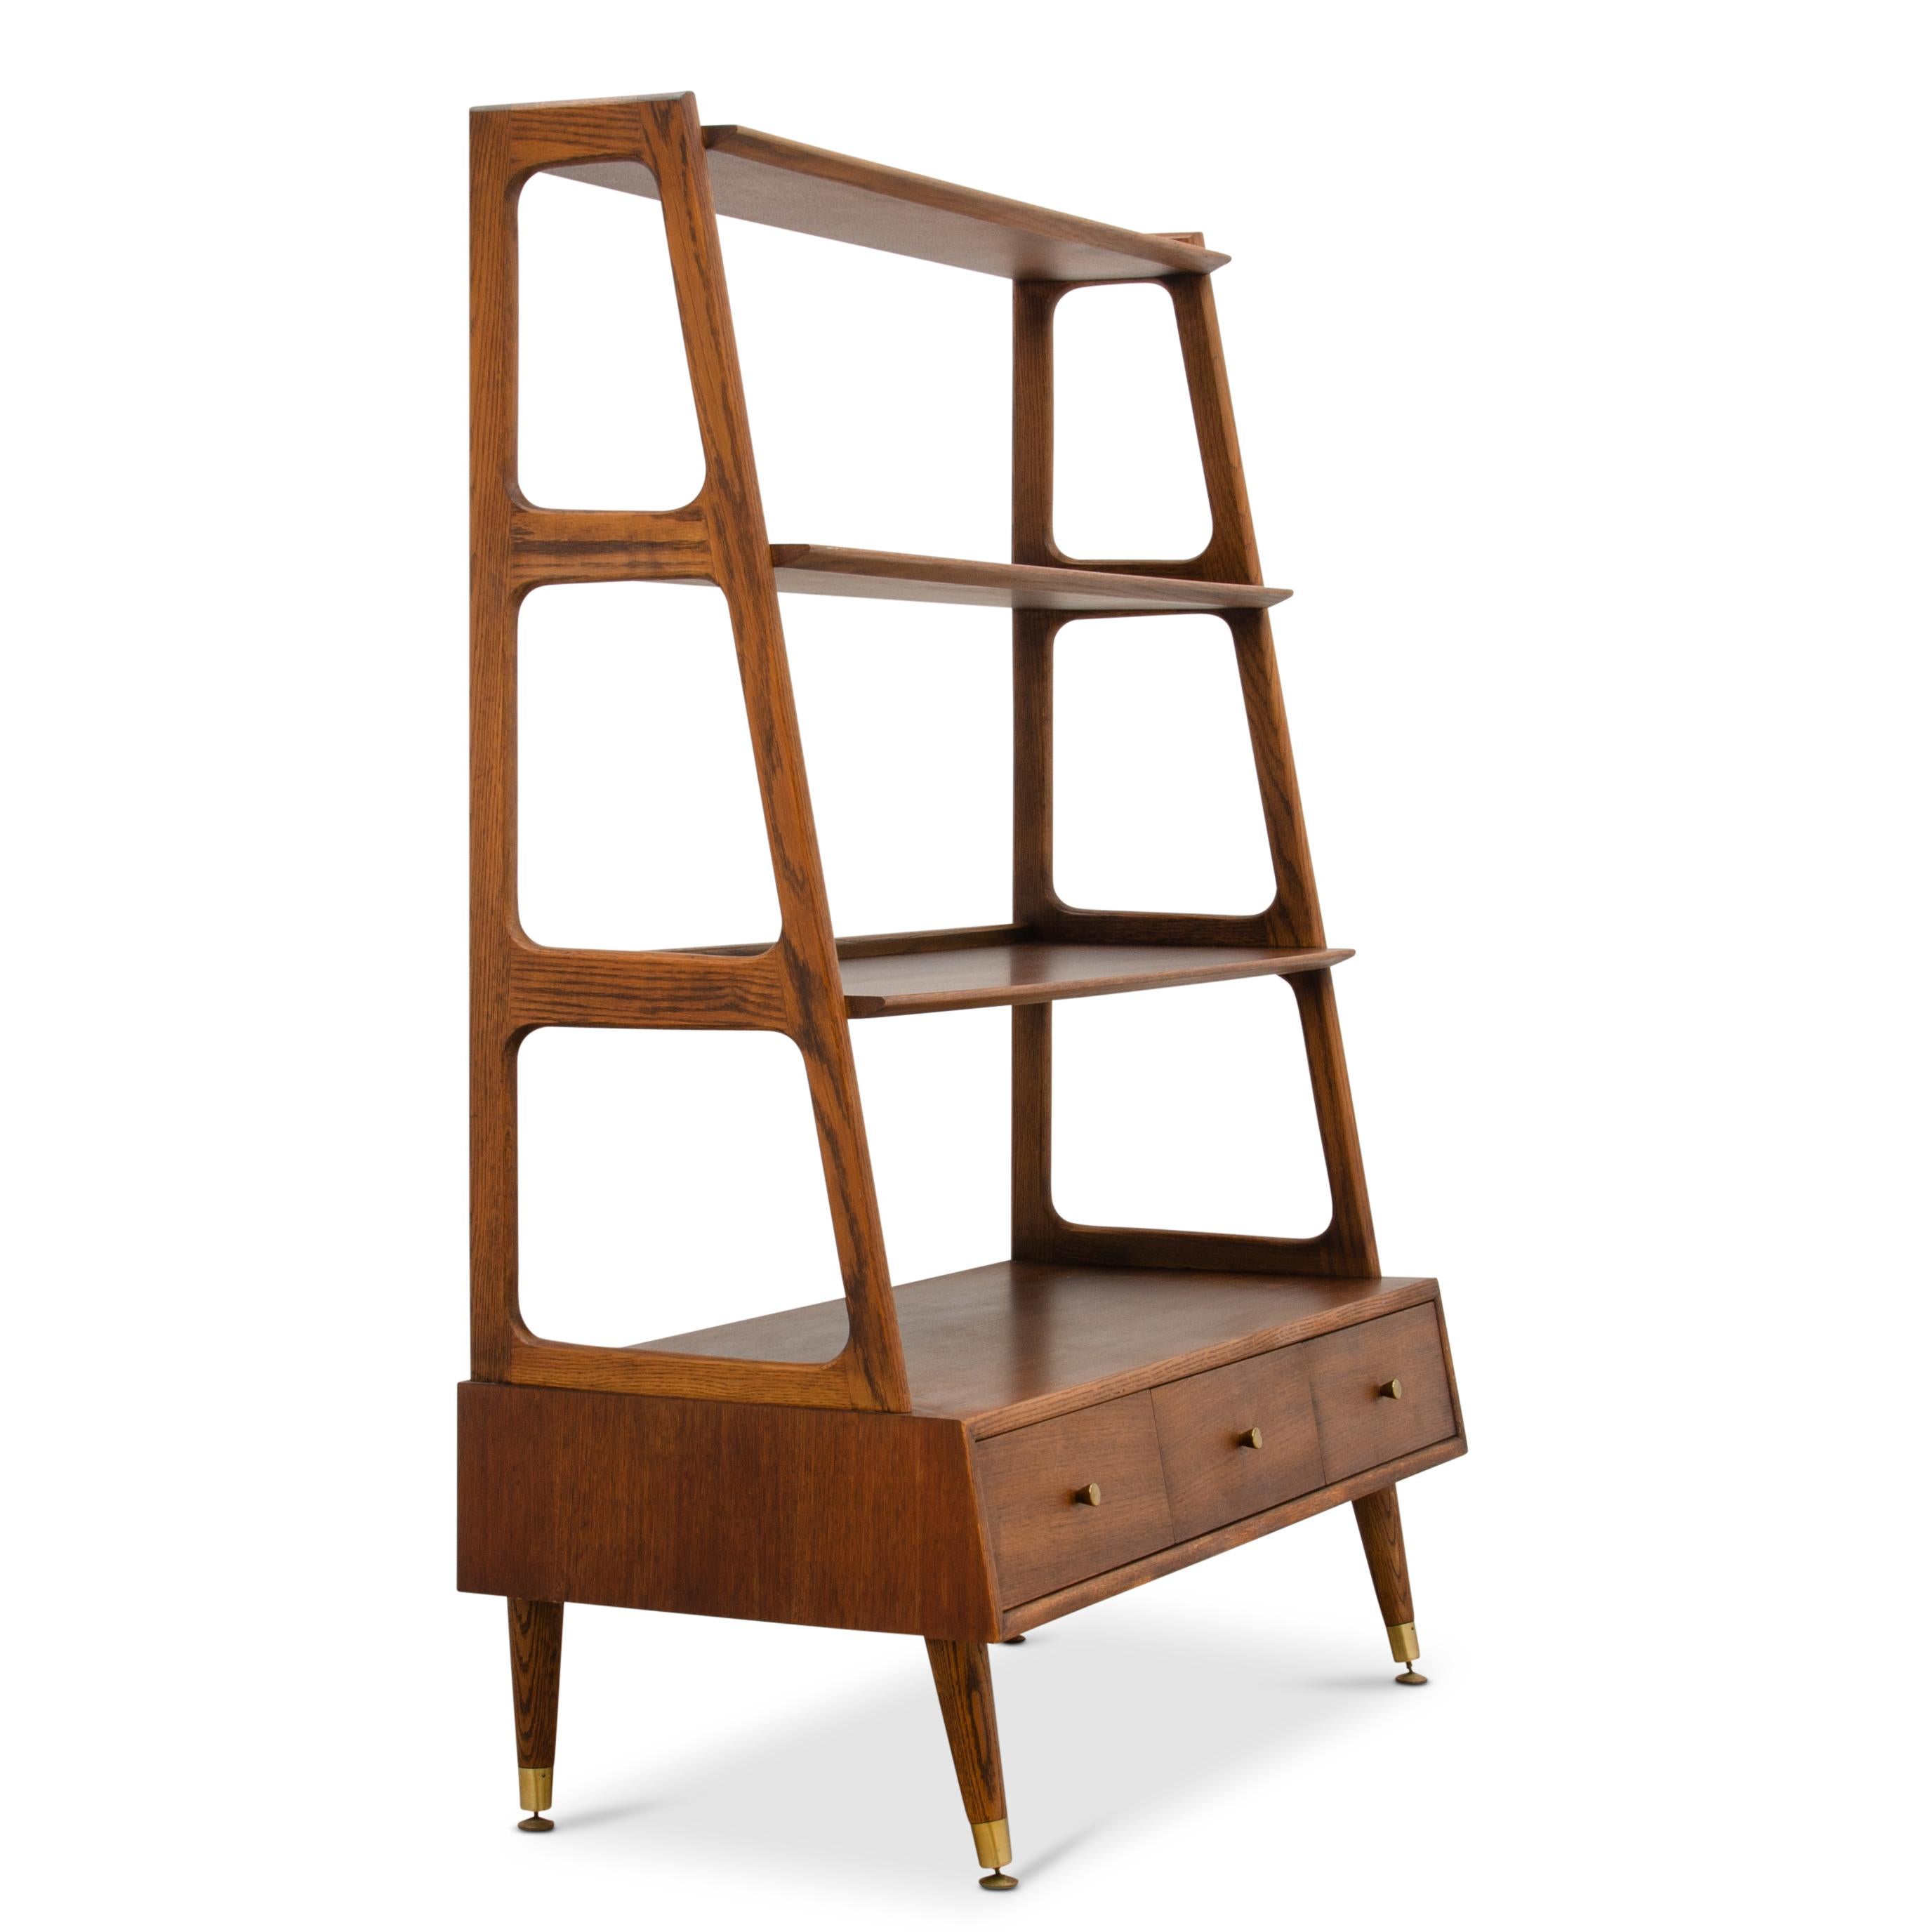 An American Modern bookshelf or display cabinet. Unmarked. It is well made of oak and walnut with dovetailed drawers and brass feet. The height of the top shelf opening is 12